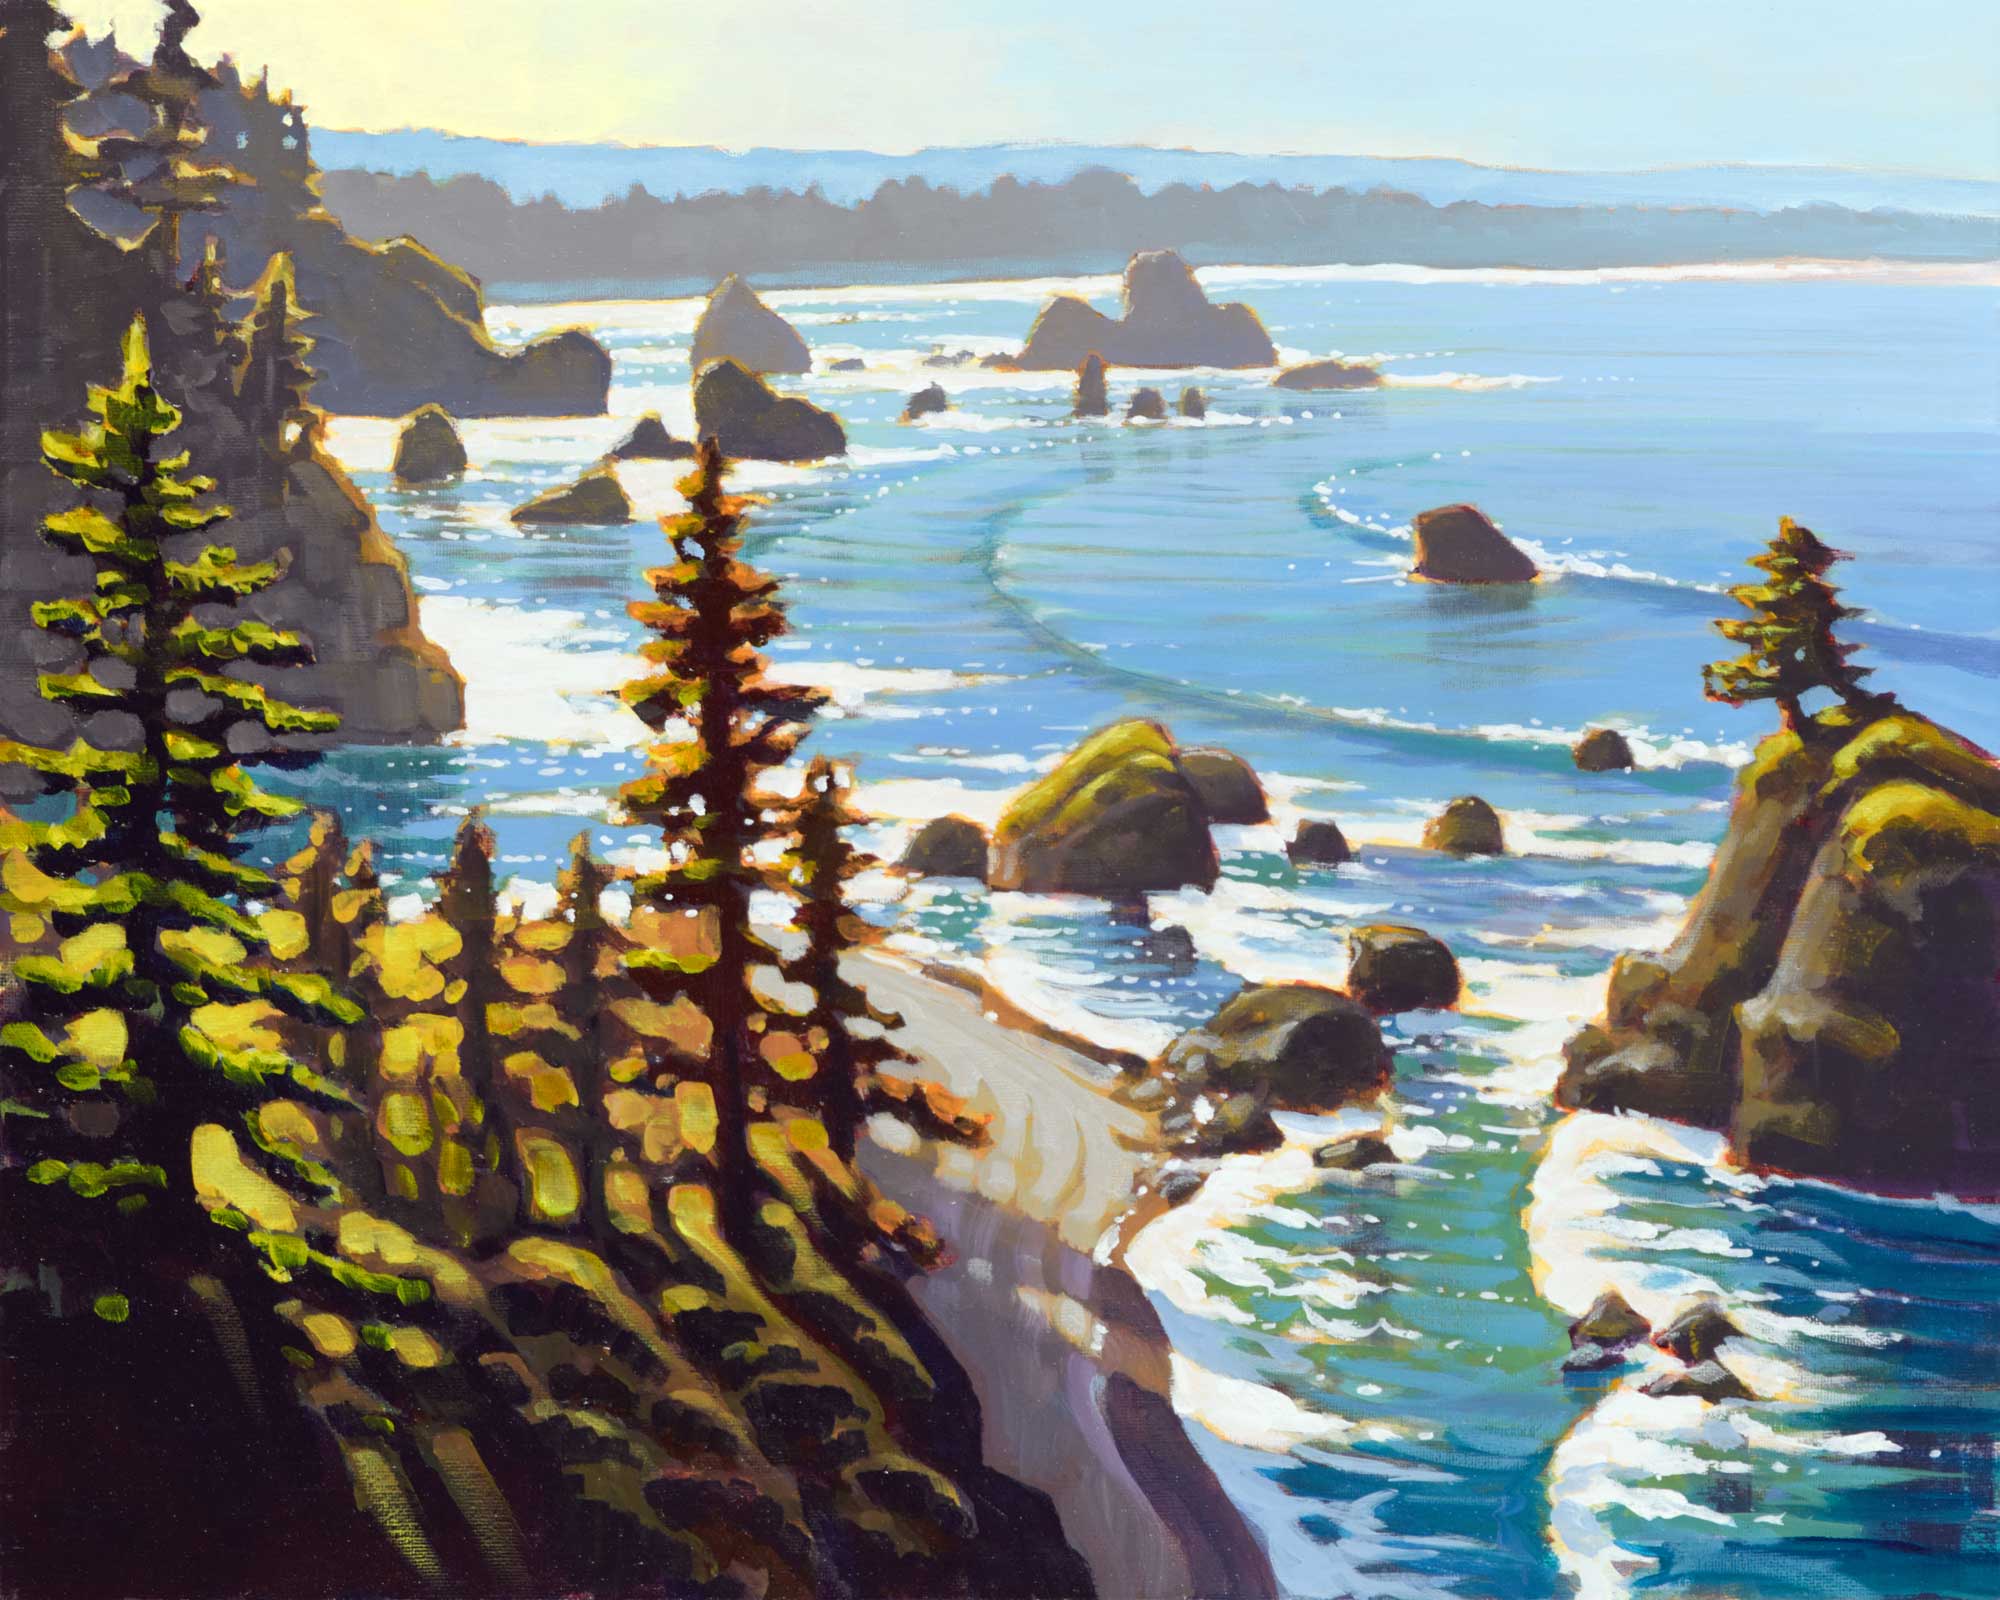 Plein air painting of Humboldt County's rocky Trinidad coast in Northern California